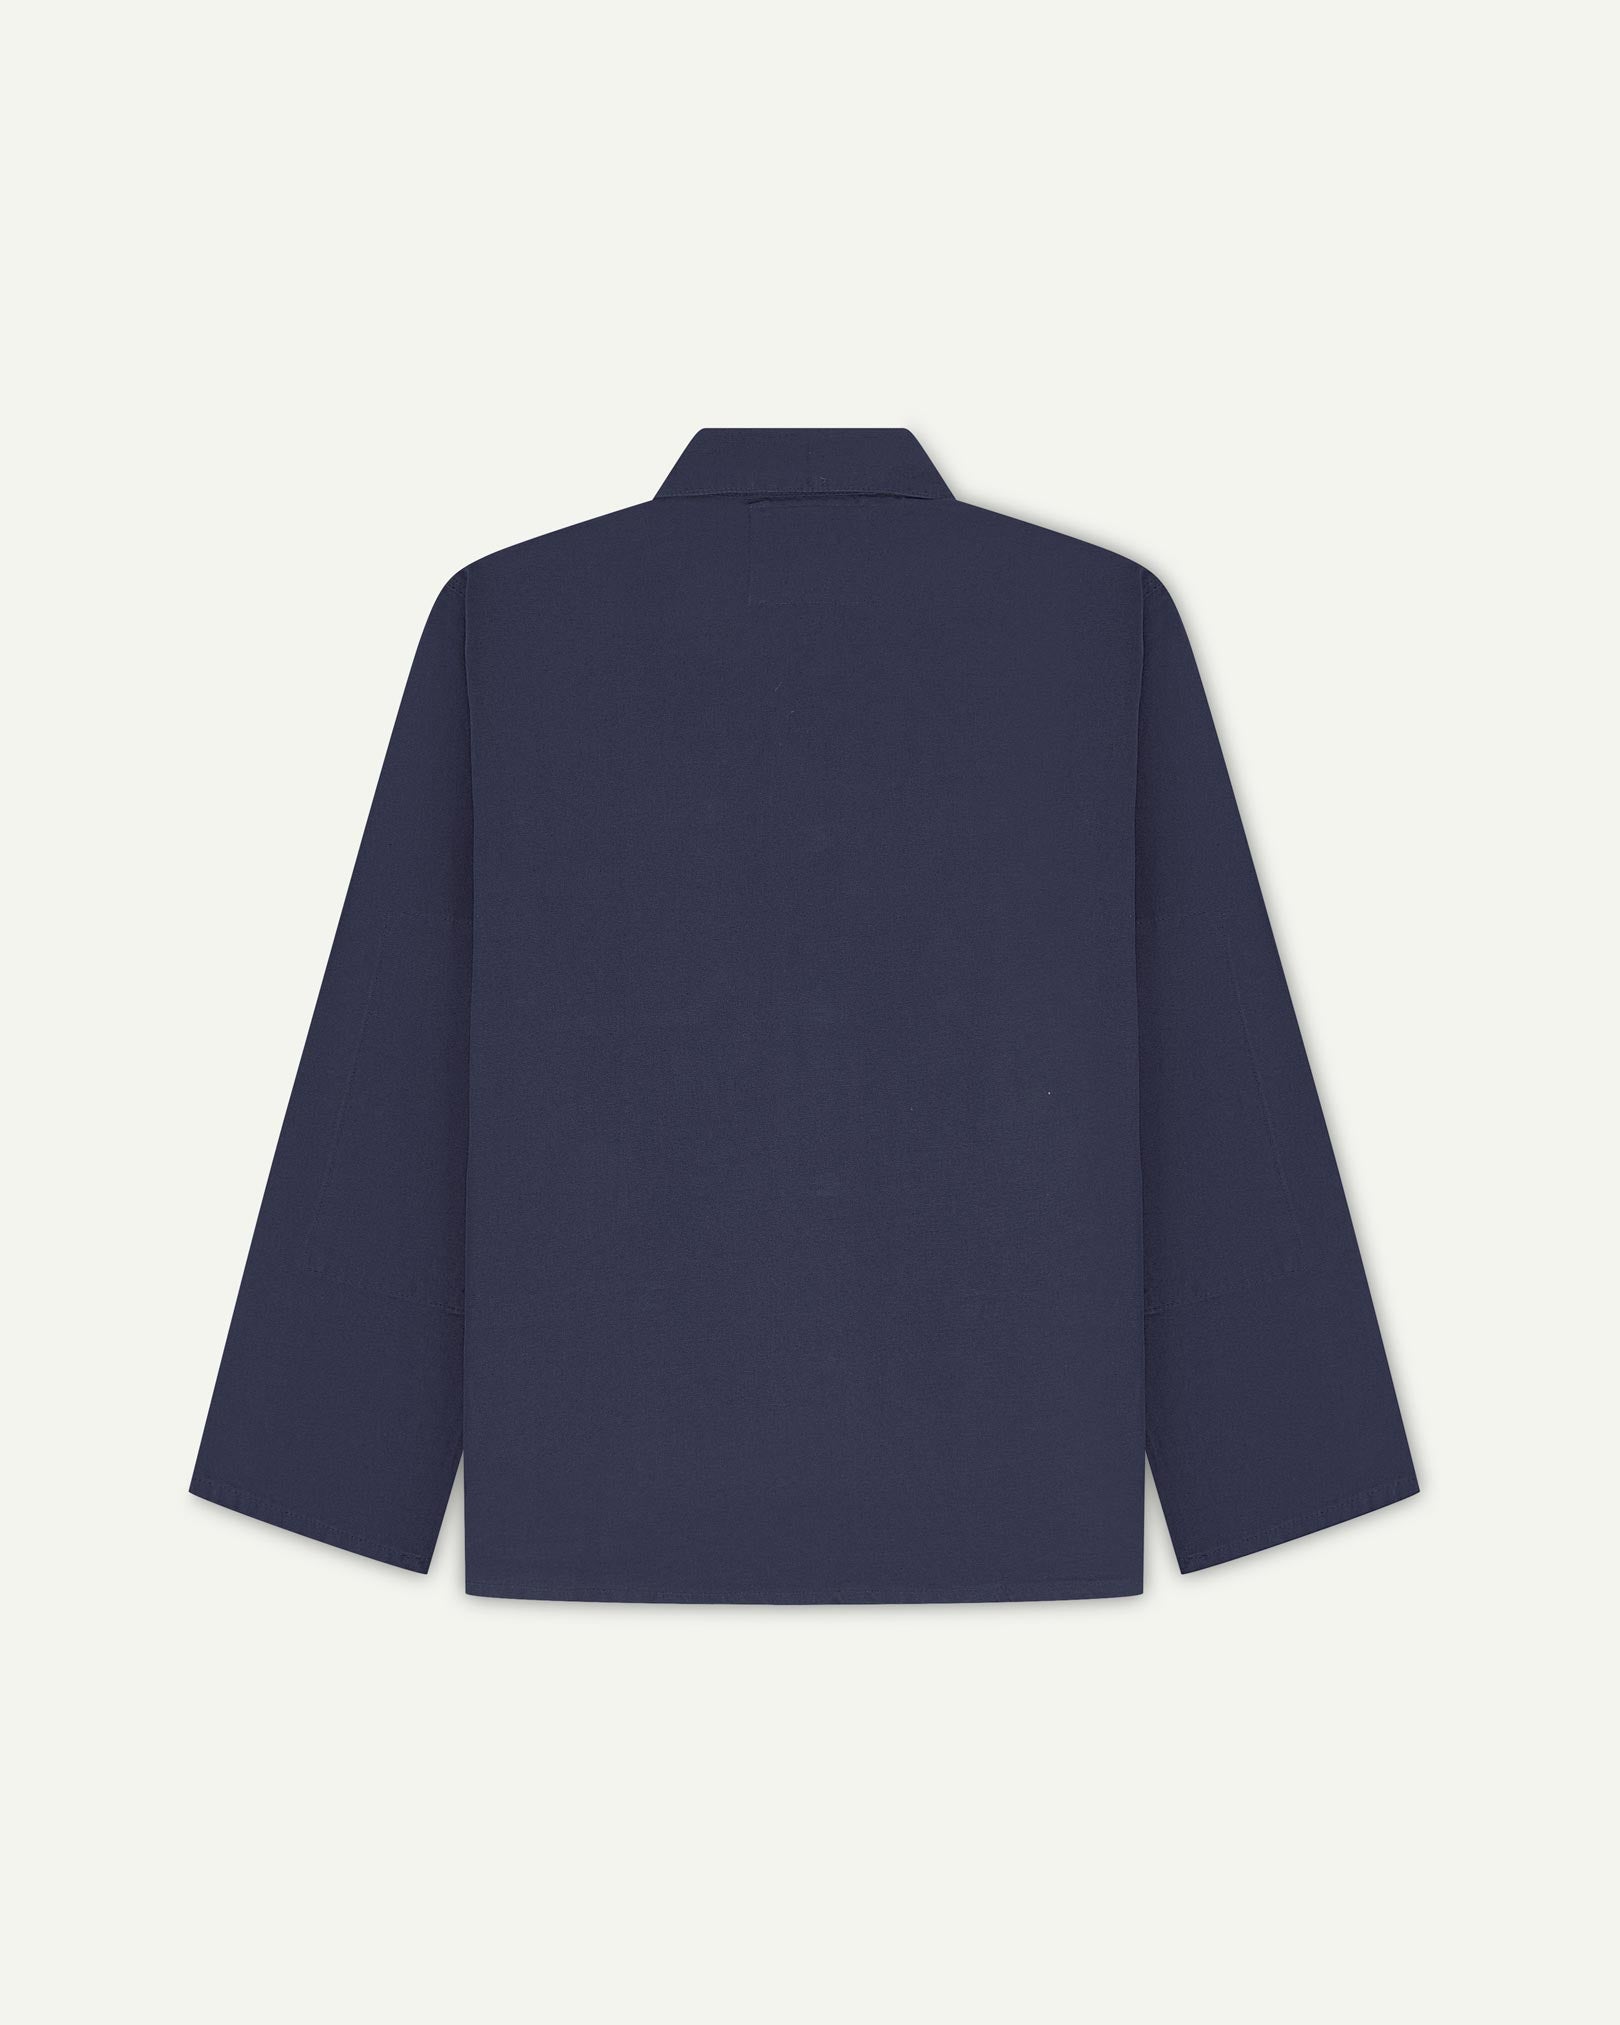 Back view of midnight blue, buttoned organic cotton overshirt with view of reinforced elbow area and boxy silhouette.